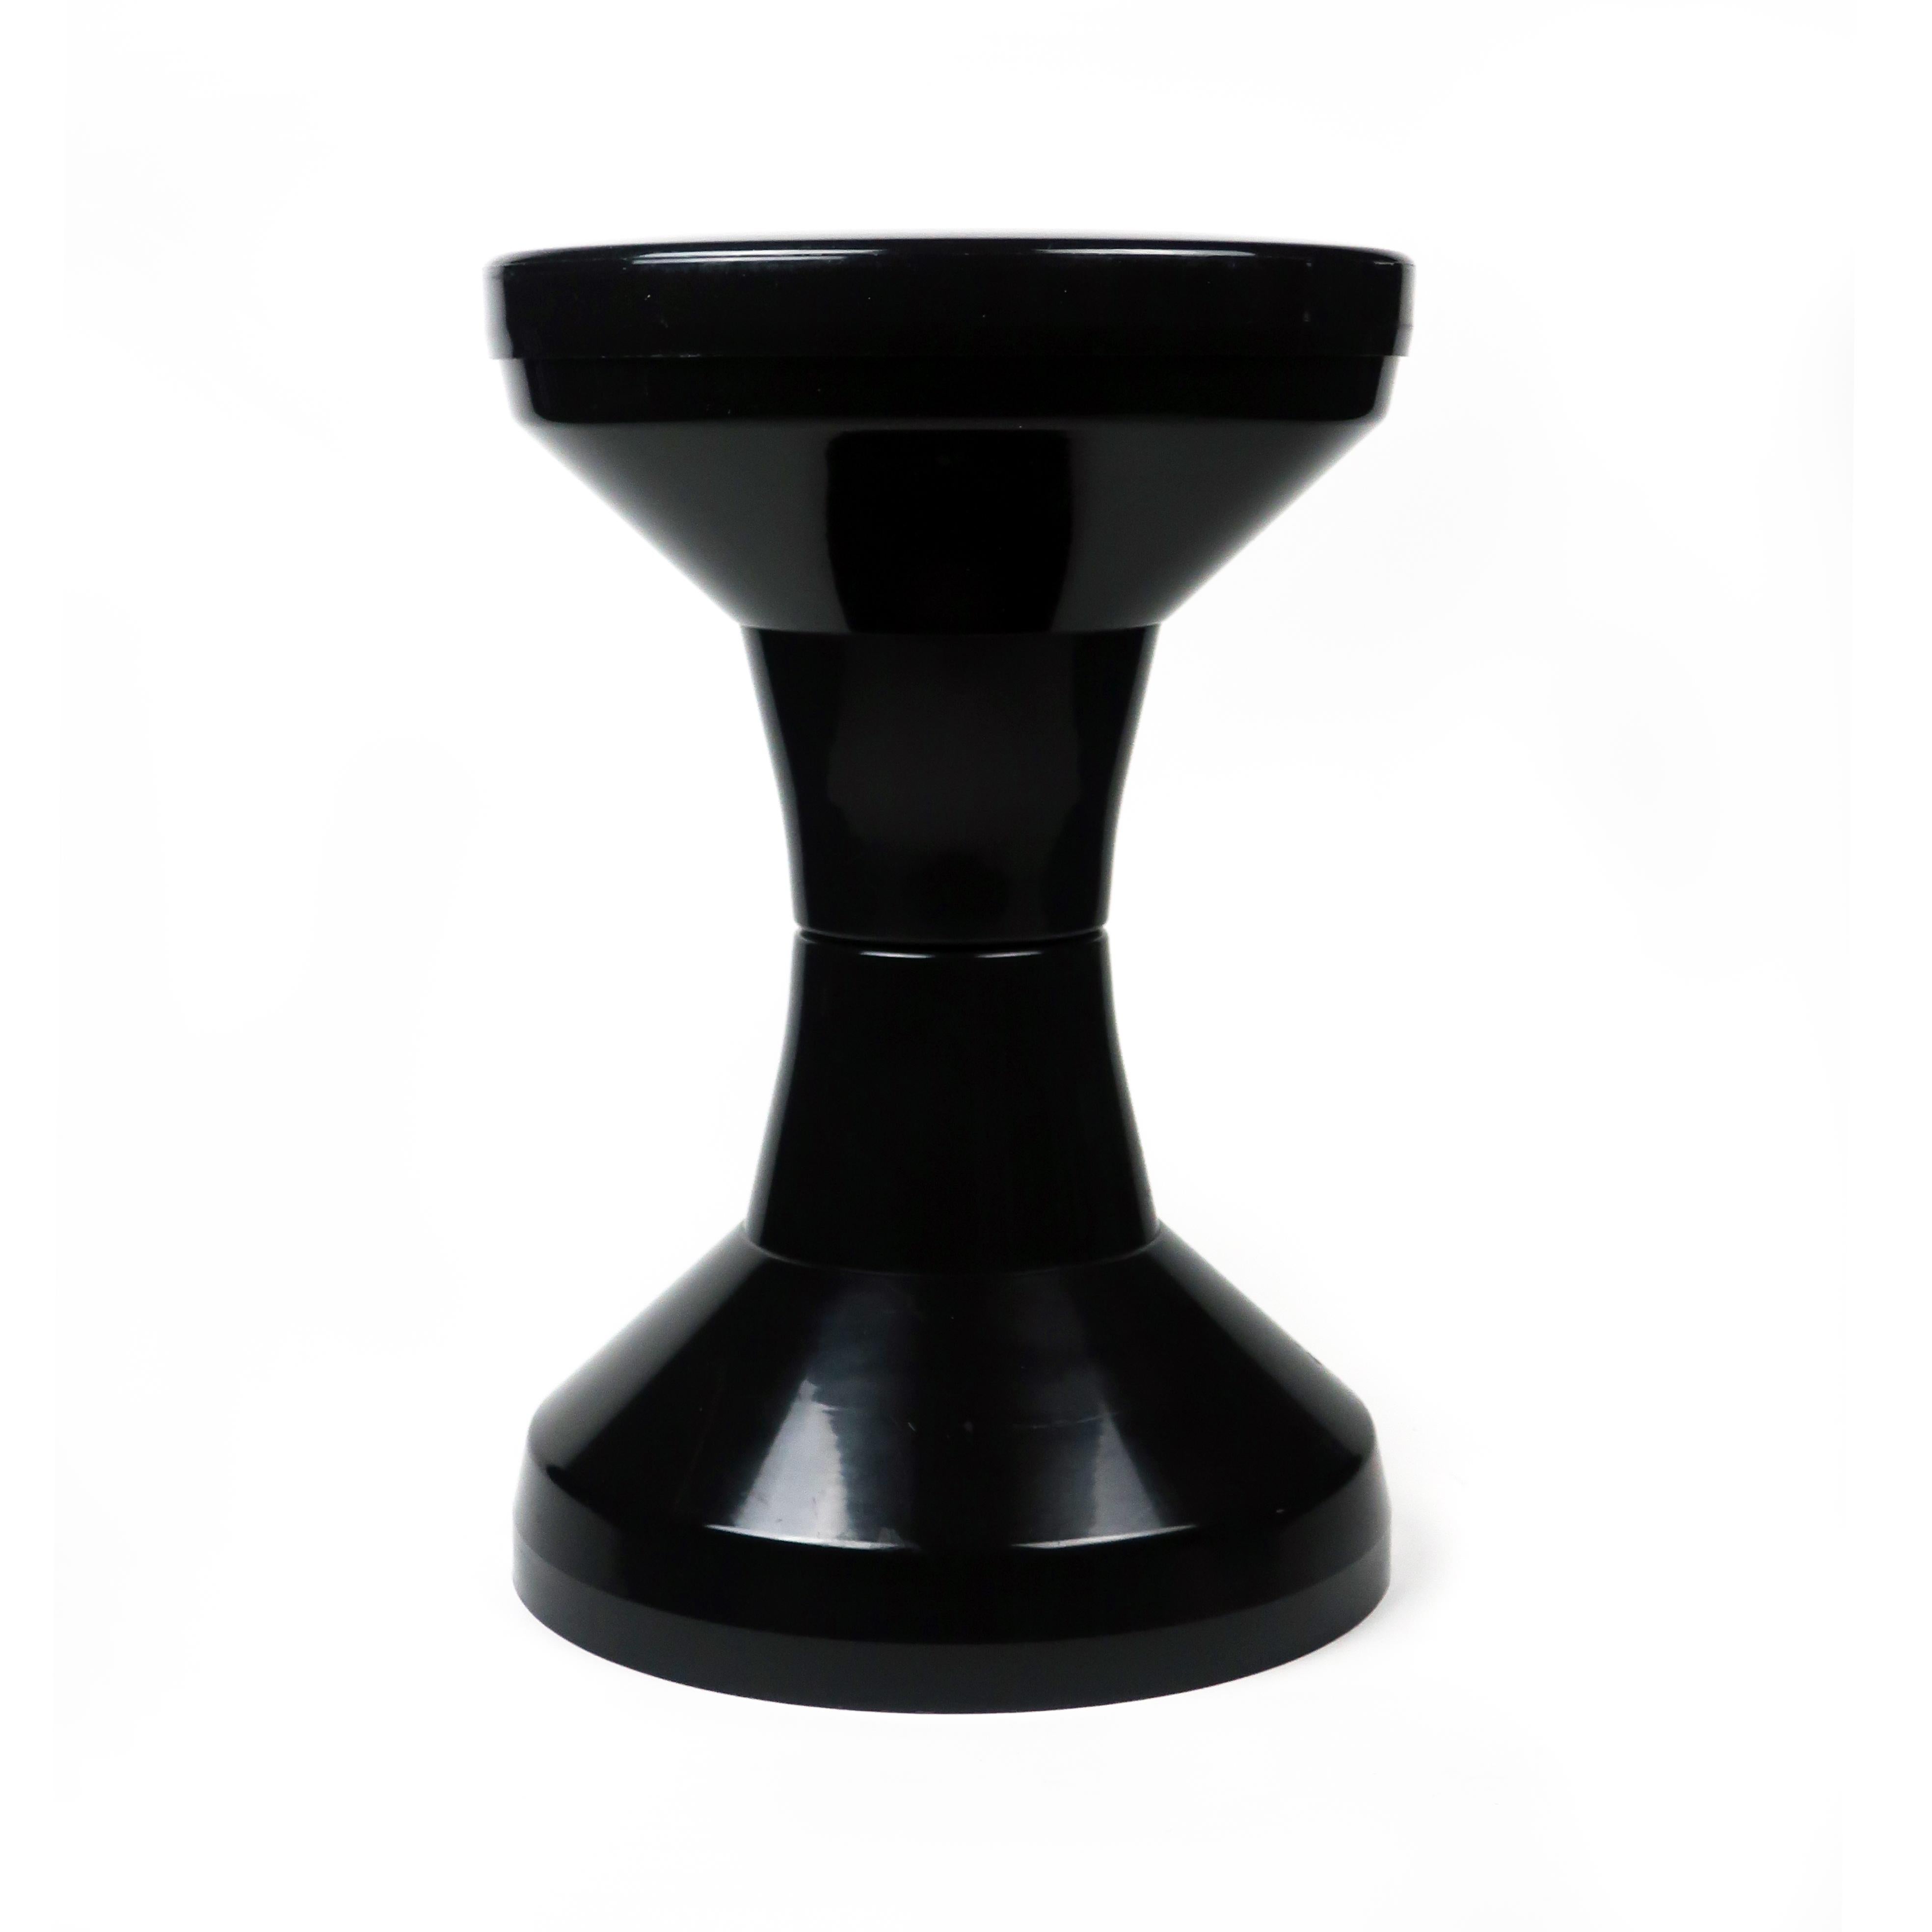 Originally thought of to be a fisherman’s stool, this vintage black plastic stool by Henry Massonnet has an iconic hour glass shape and became a classic of late 1960s design. Lightweight and versatile, it makes a great step stool, drink stand, side